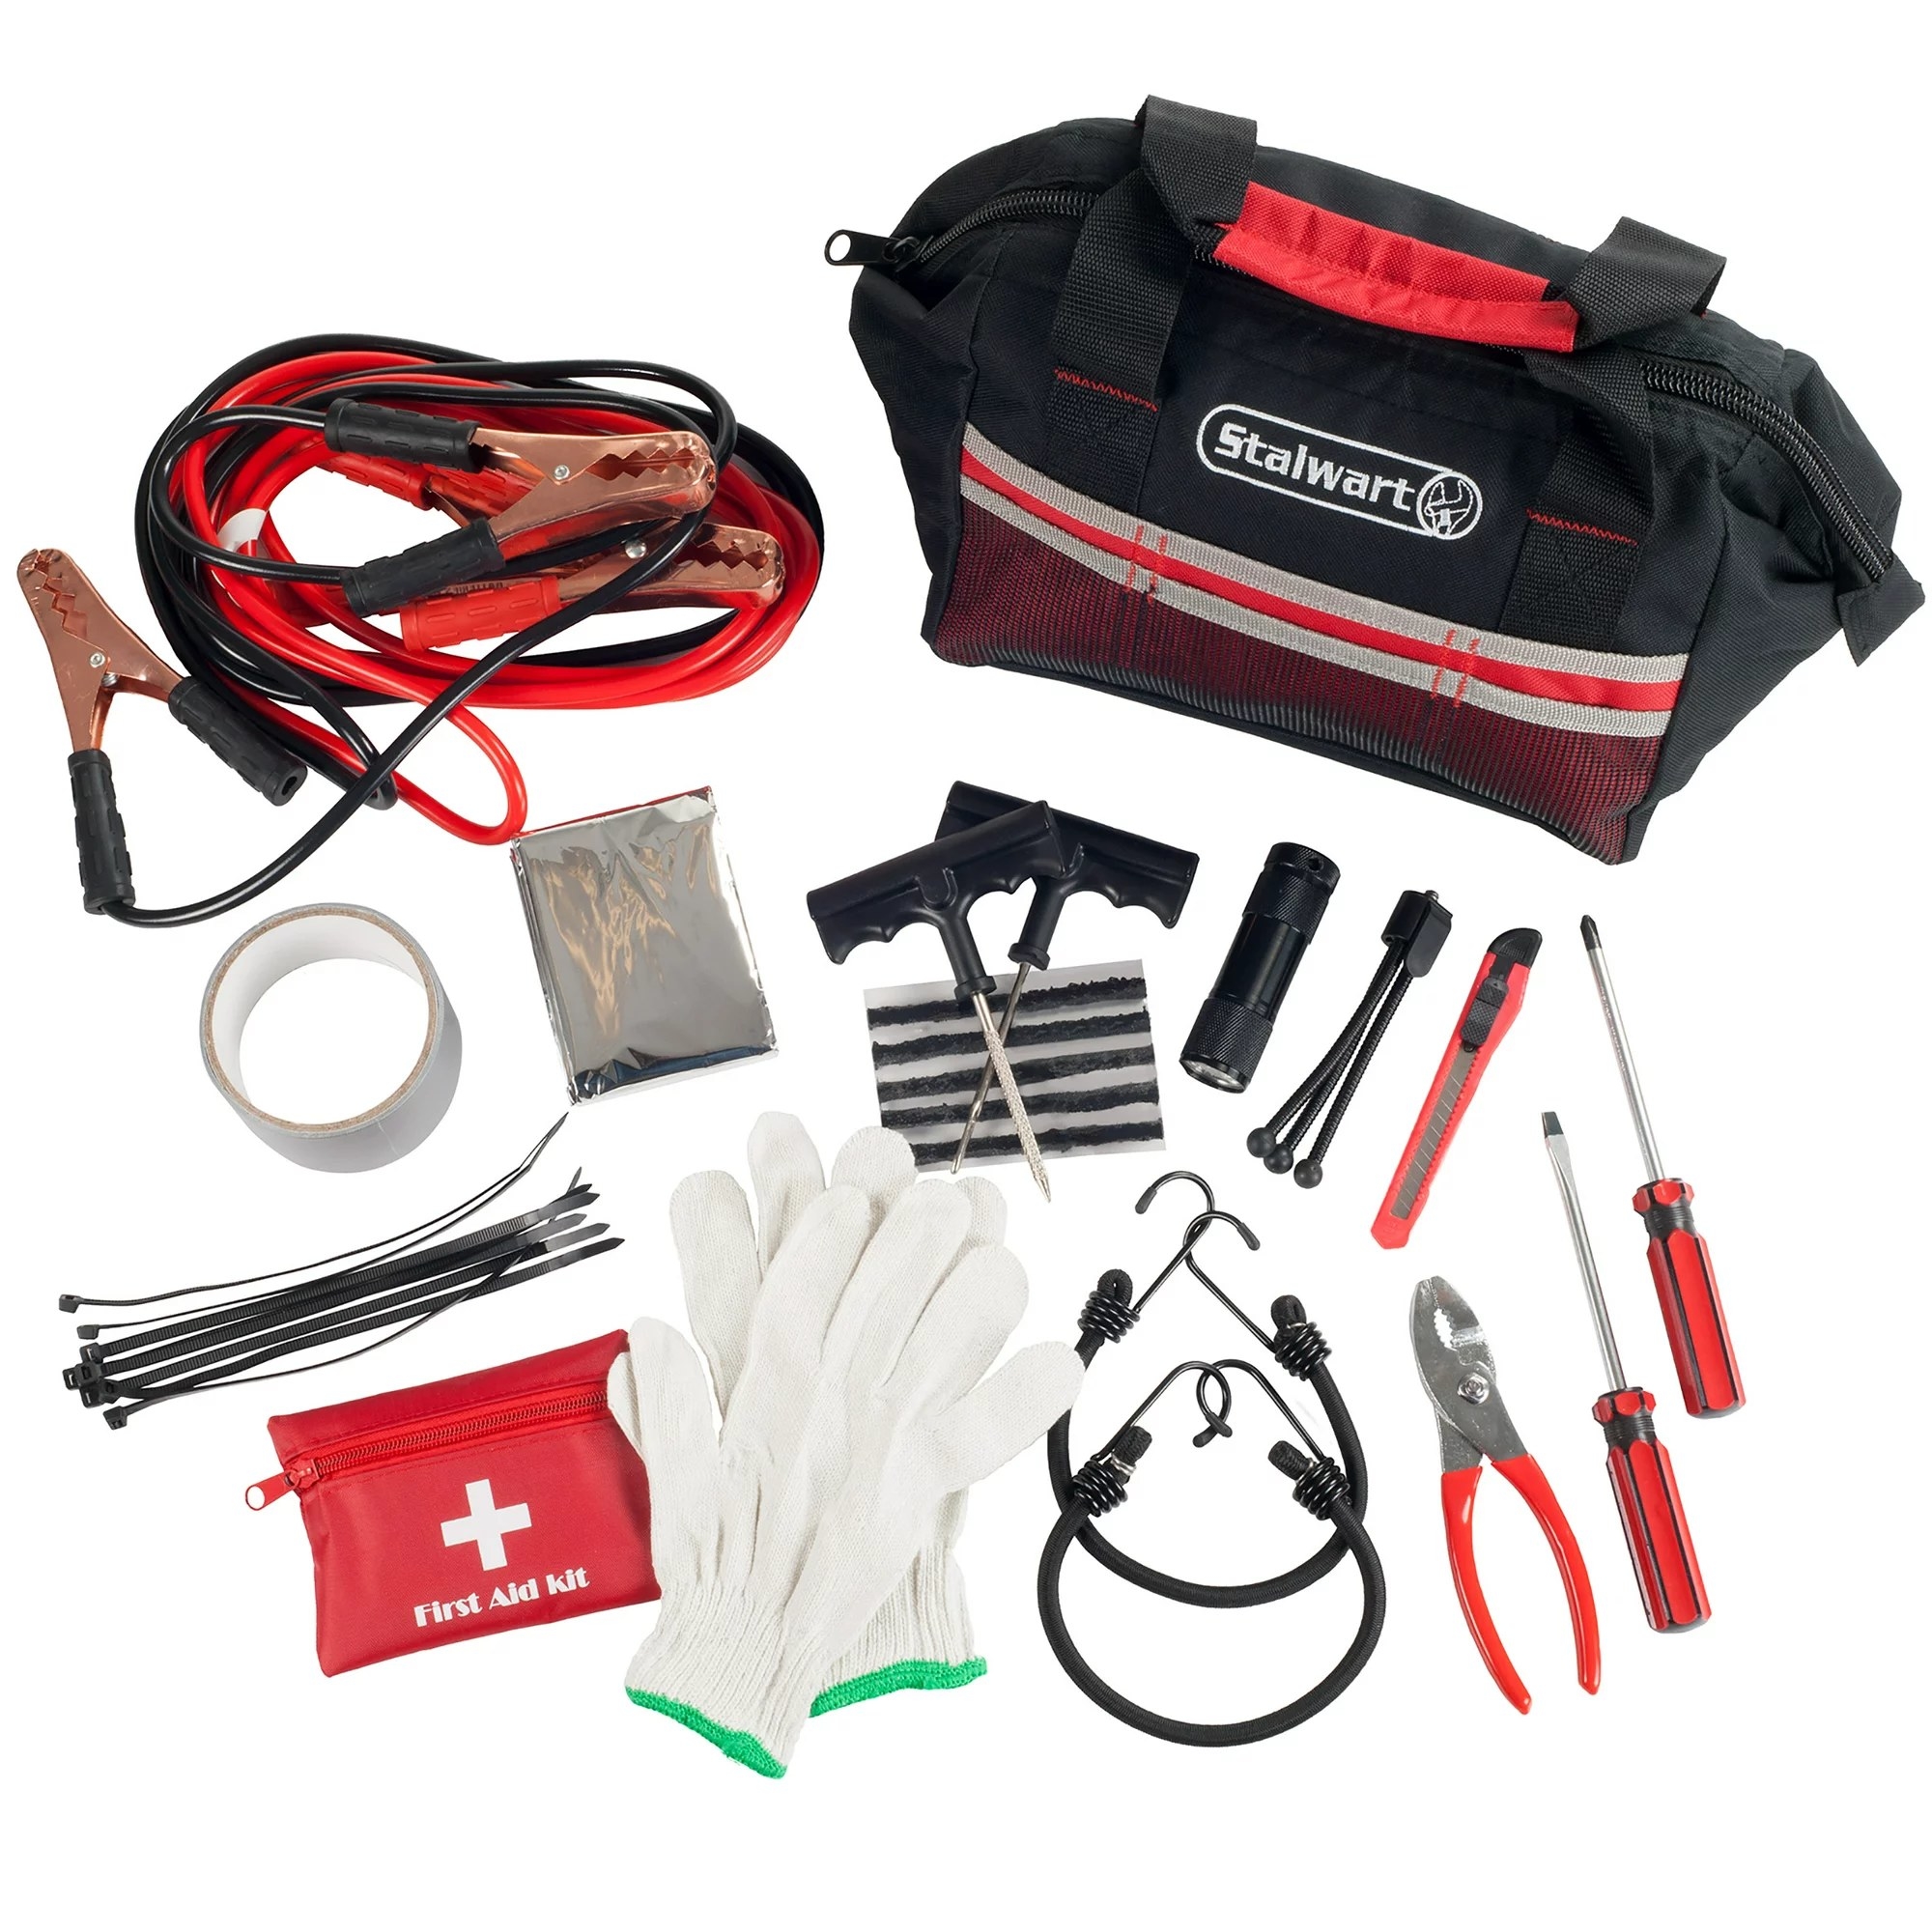 The auto safety kit in the color Red